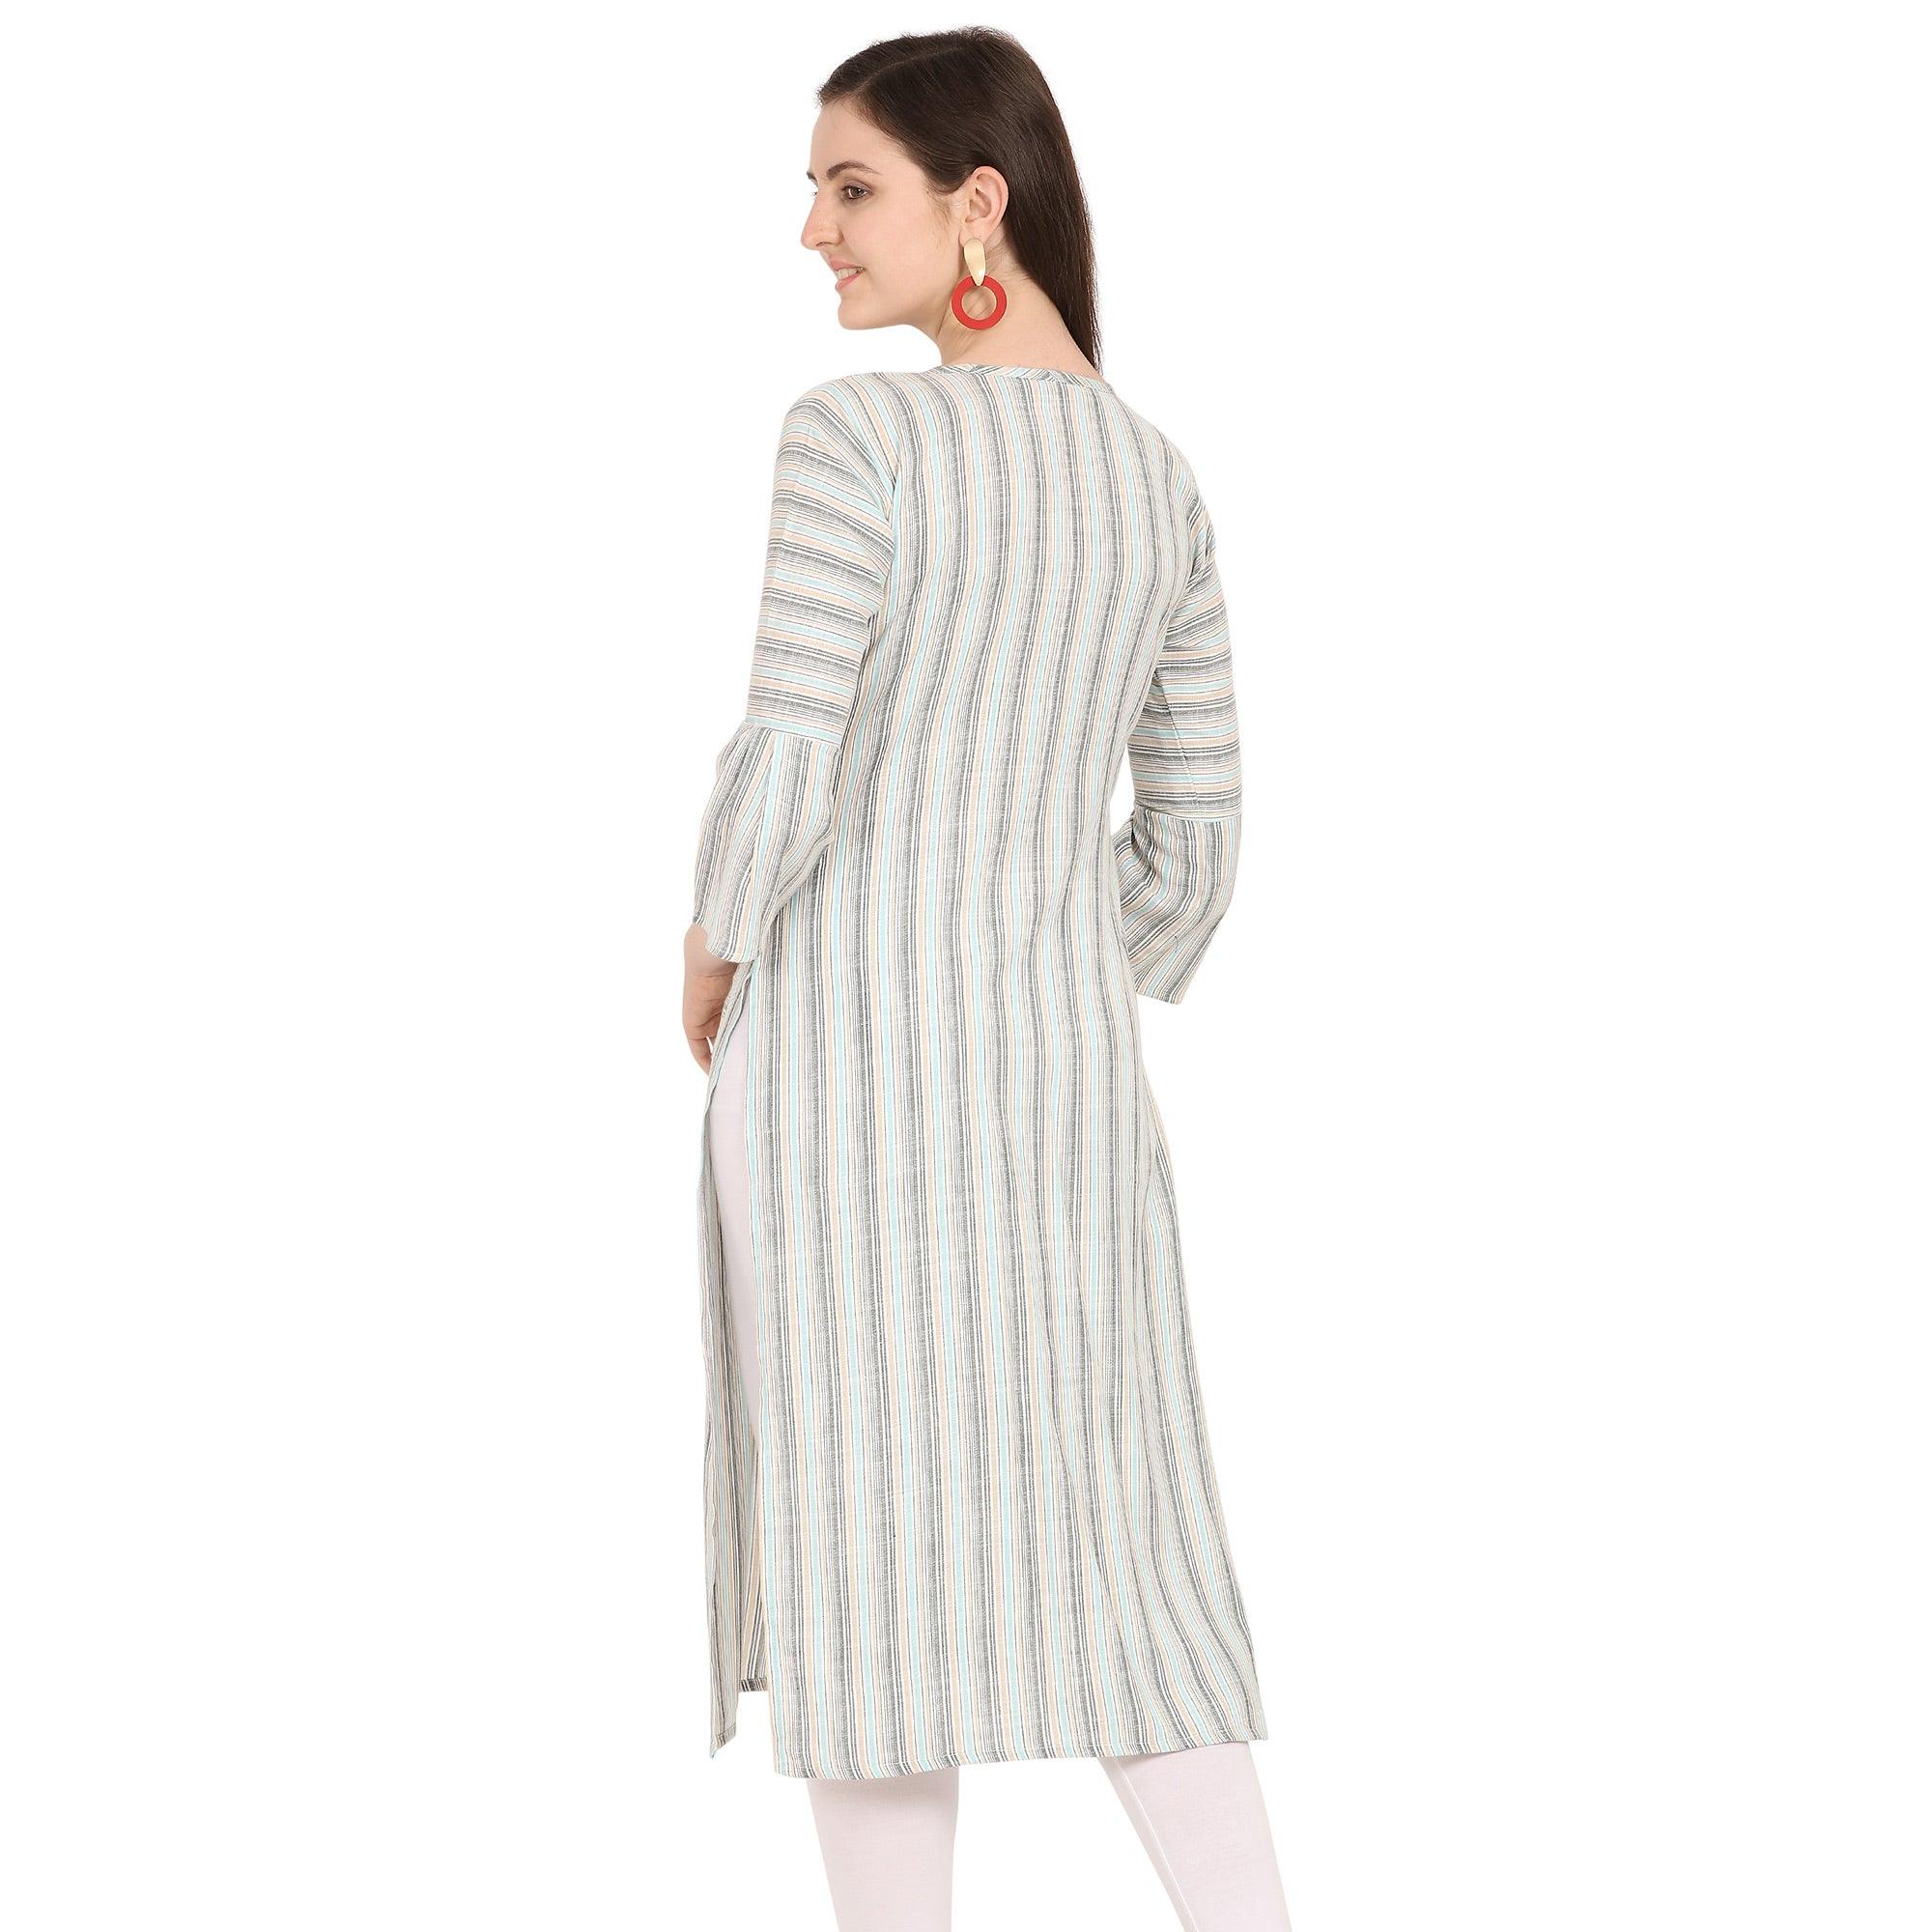 Arresting Off White-Blue Colored Party Wear Embroidered Work Rayon Kurti - Peachmode